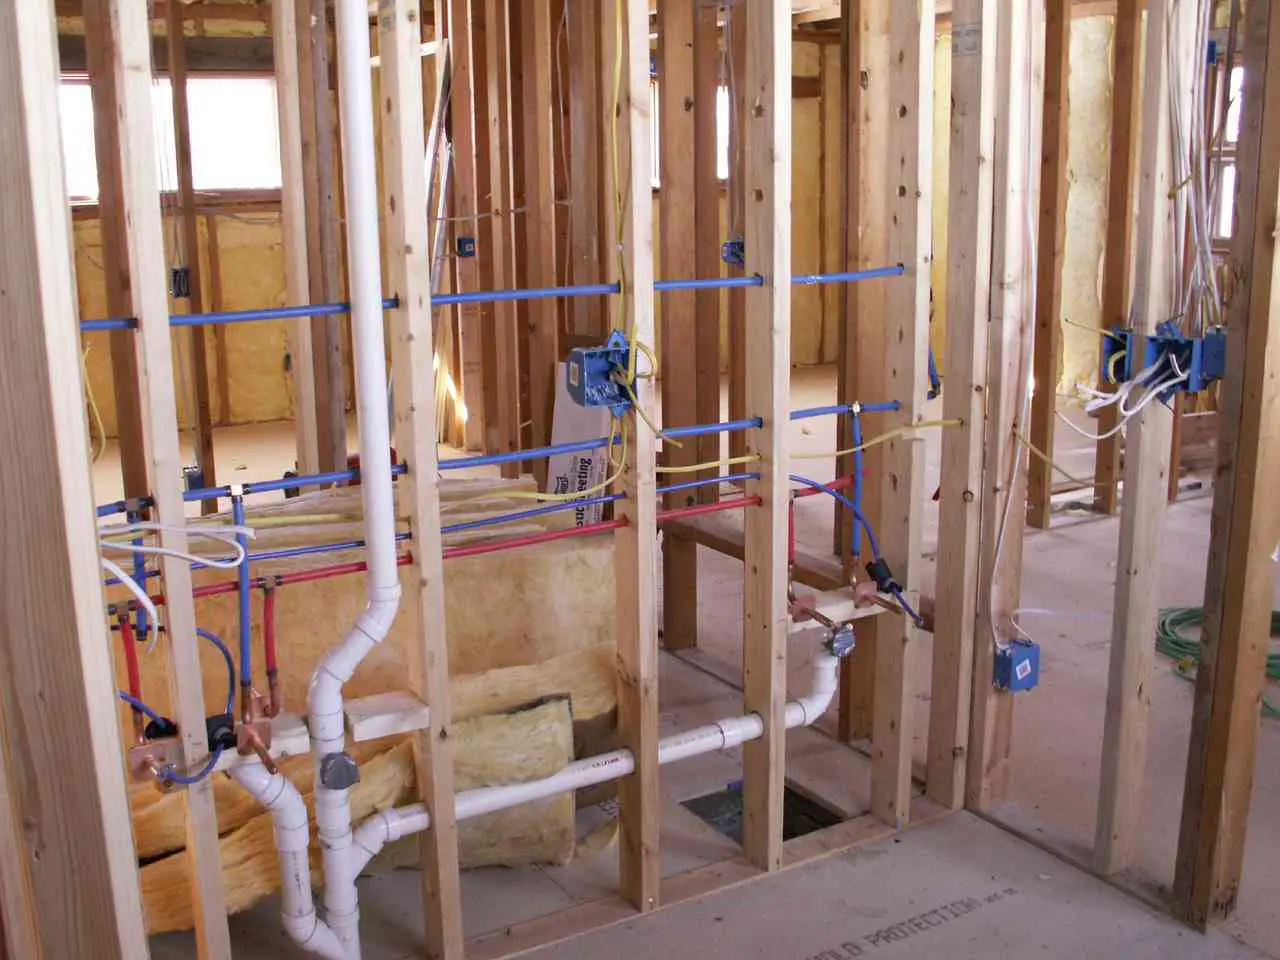 plumbing process in a home